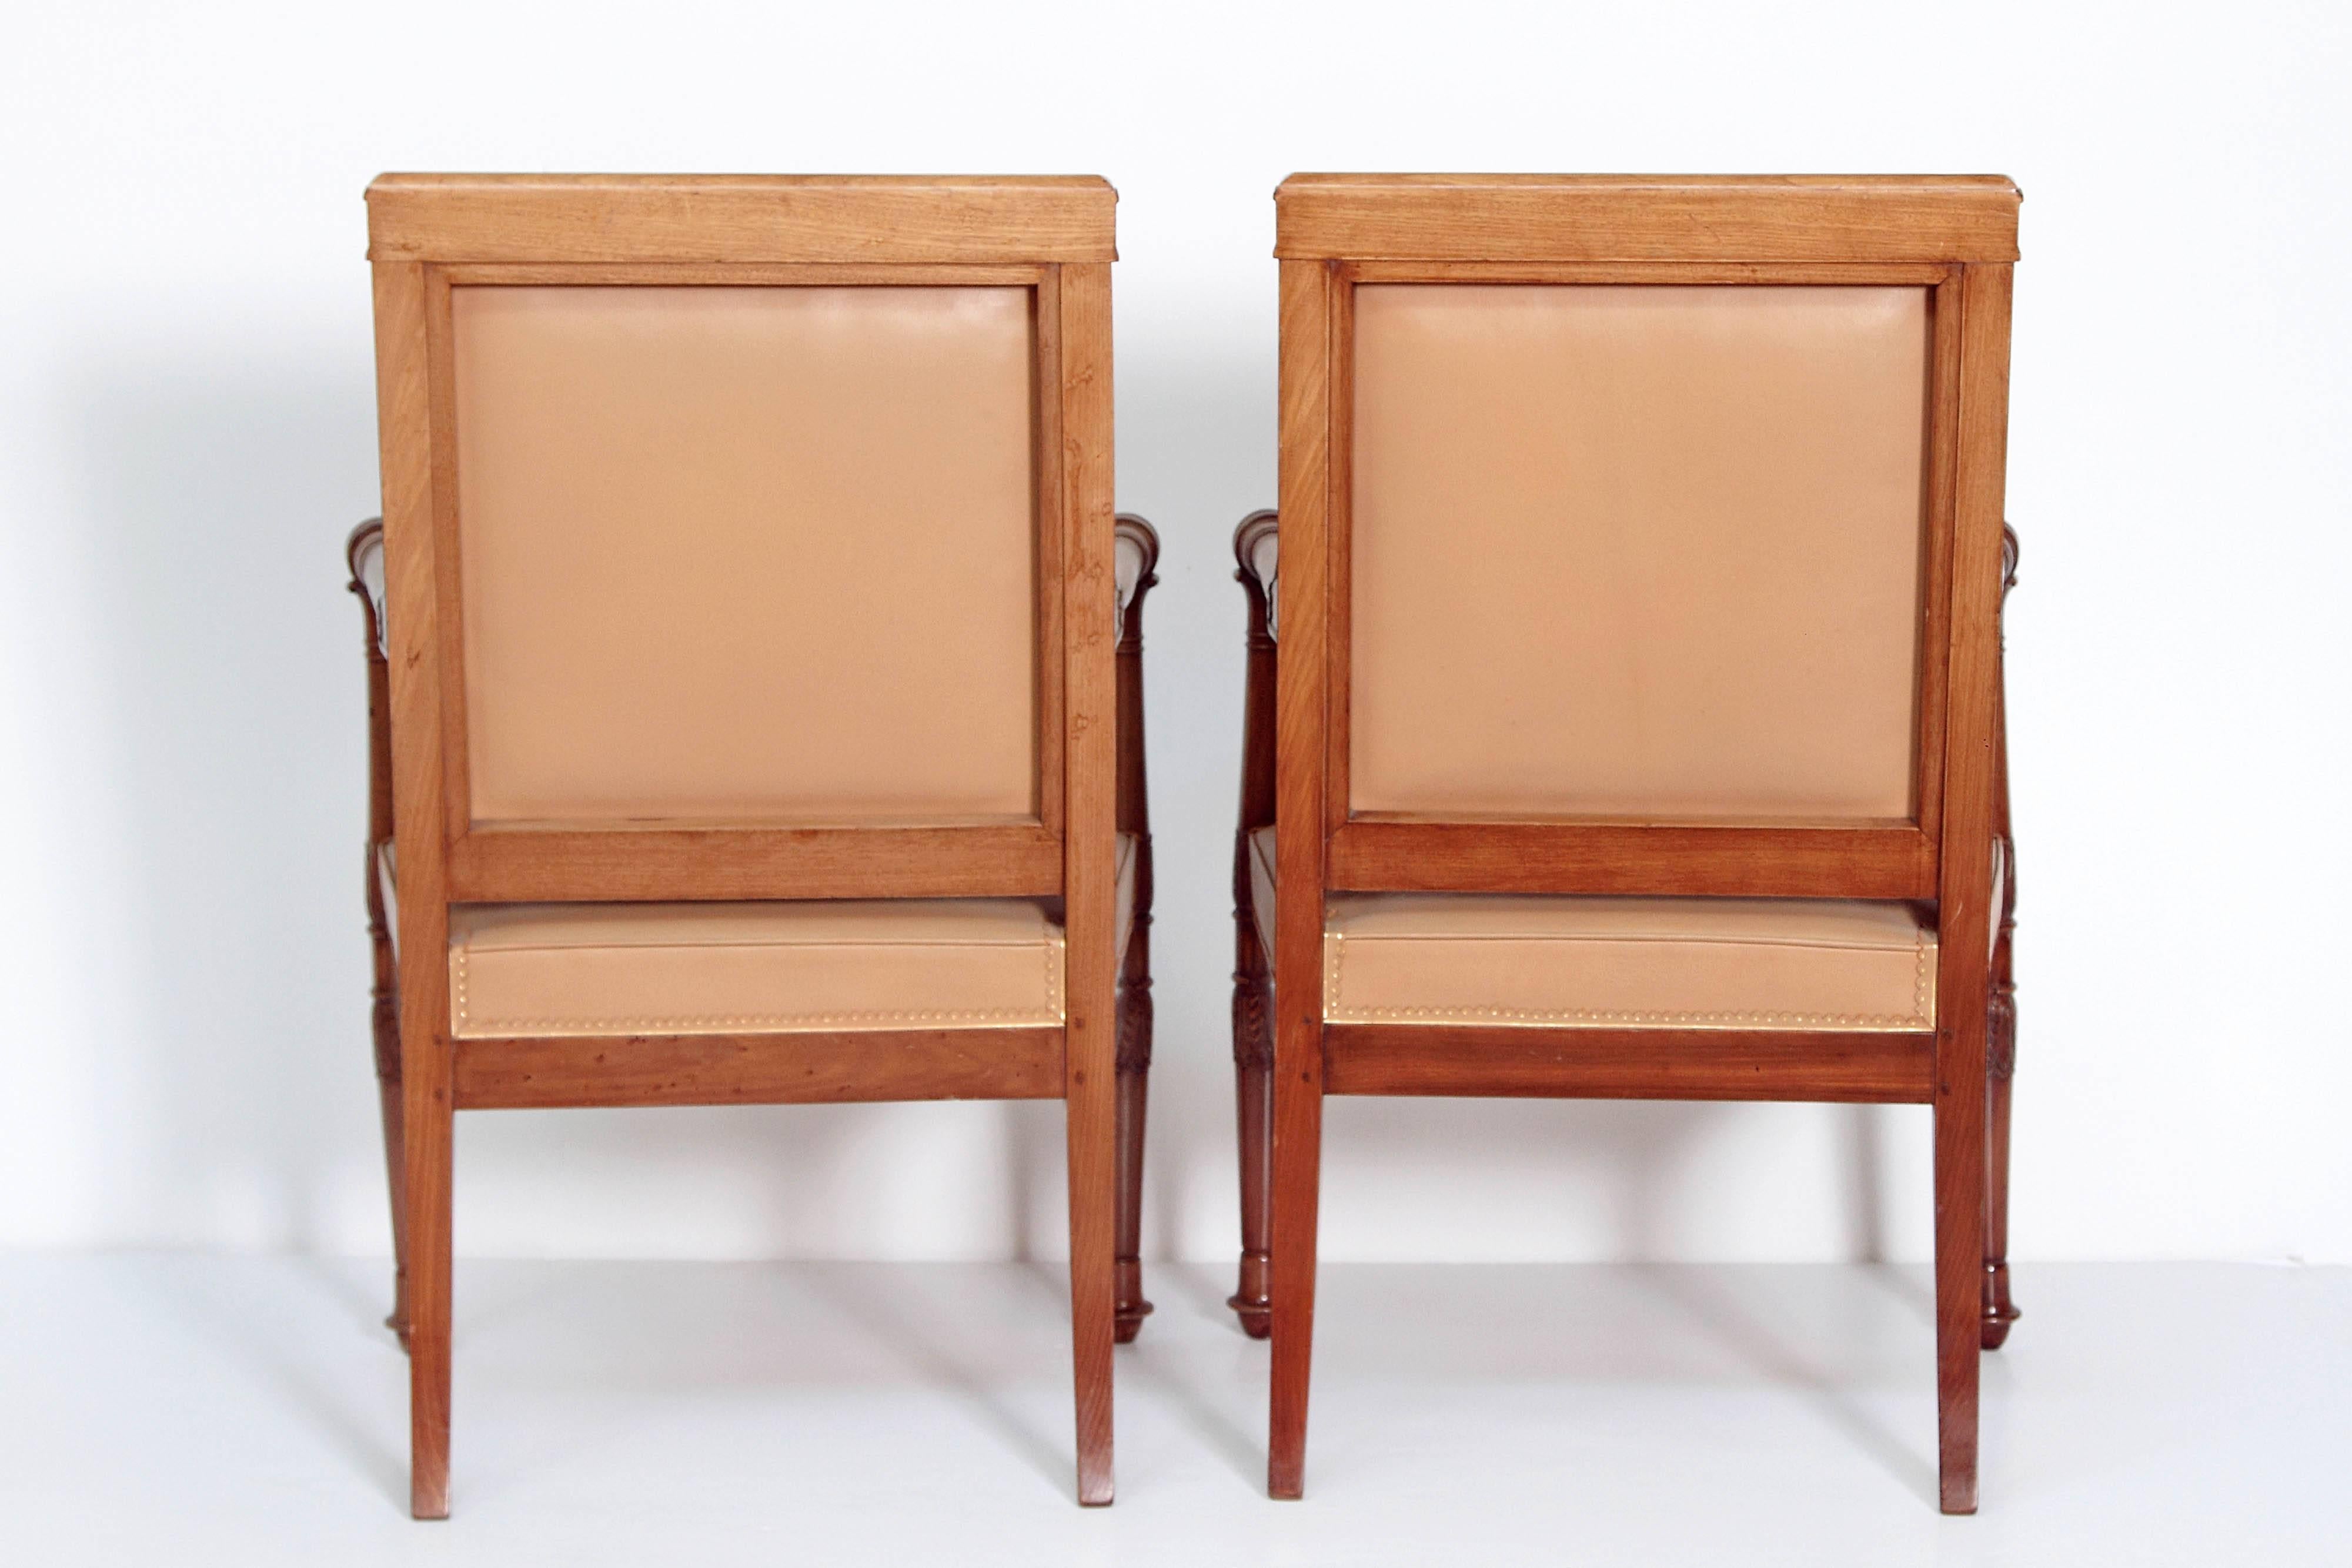 Pair of Empire armchairs, mahogany with turned arms and tapered legs, rectangular back, upholstered in rich tan leather with gilt leather trim, Christie's label.
  